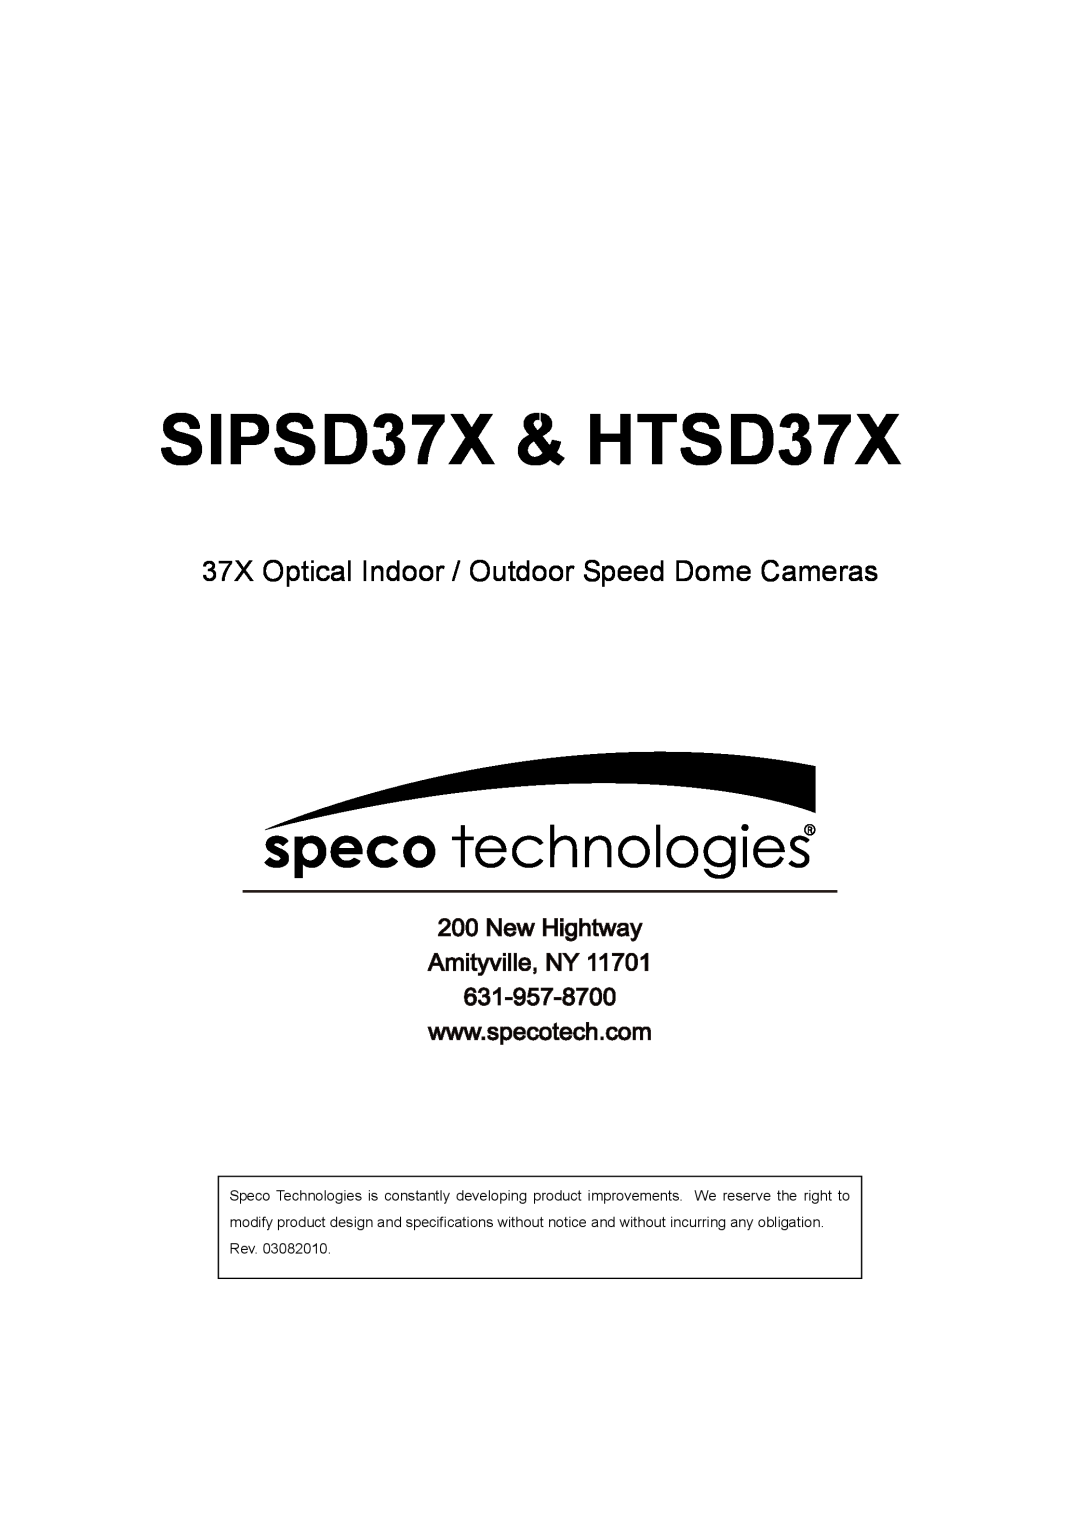 Speco Technologies specifications New Hightway Amityville, NY 631-957-8700, SIPSD37X & HTSD37X 